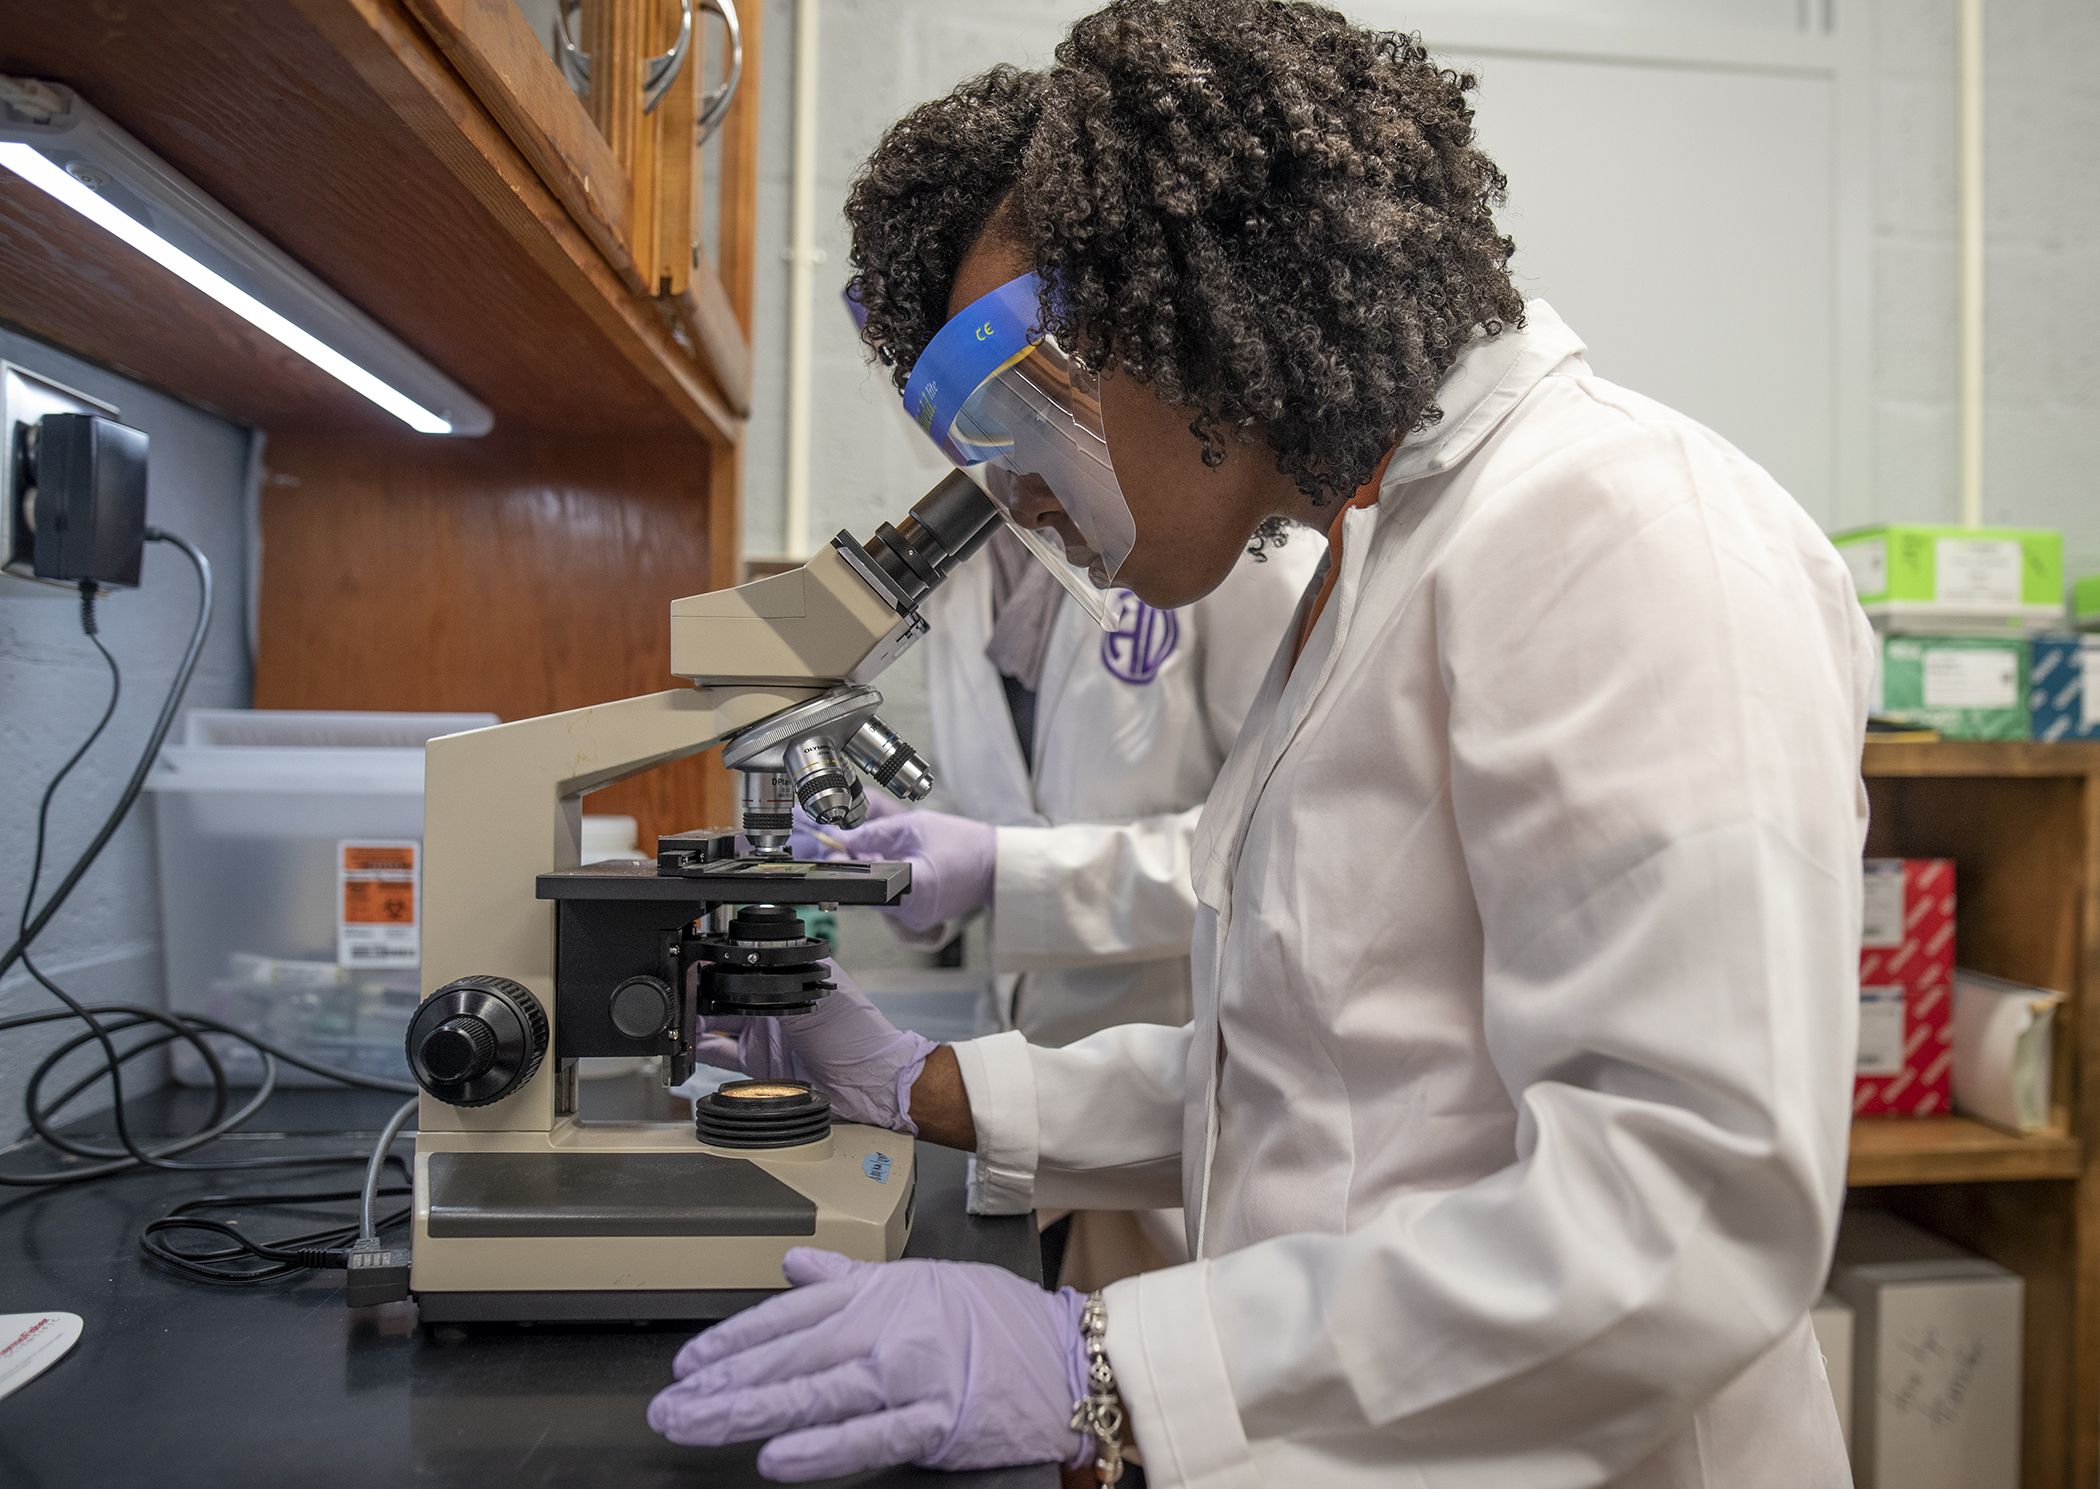 Amber Stone works with RNA samples in a lab in the Poole Agricultural Center building